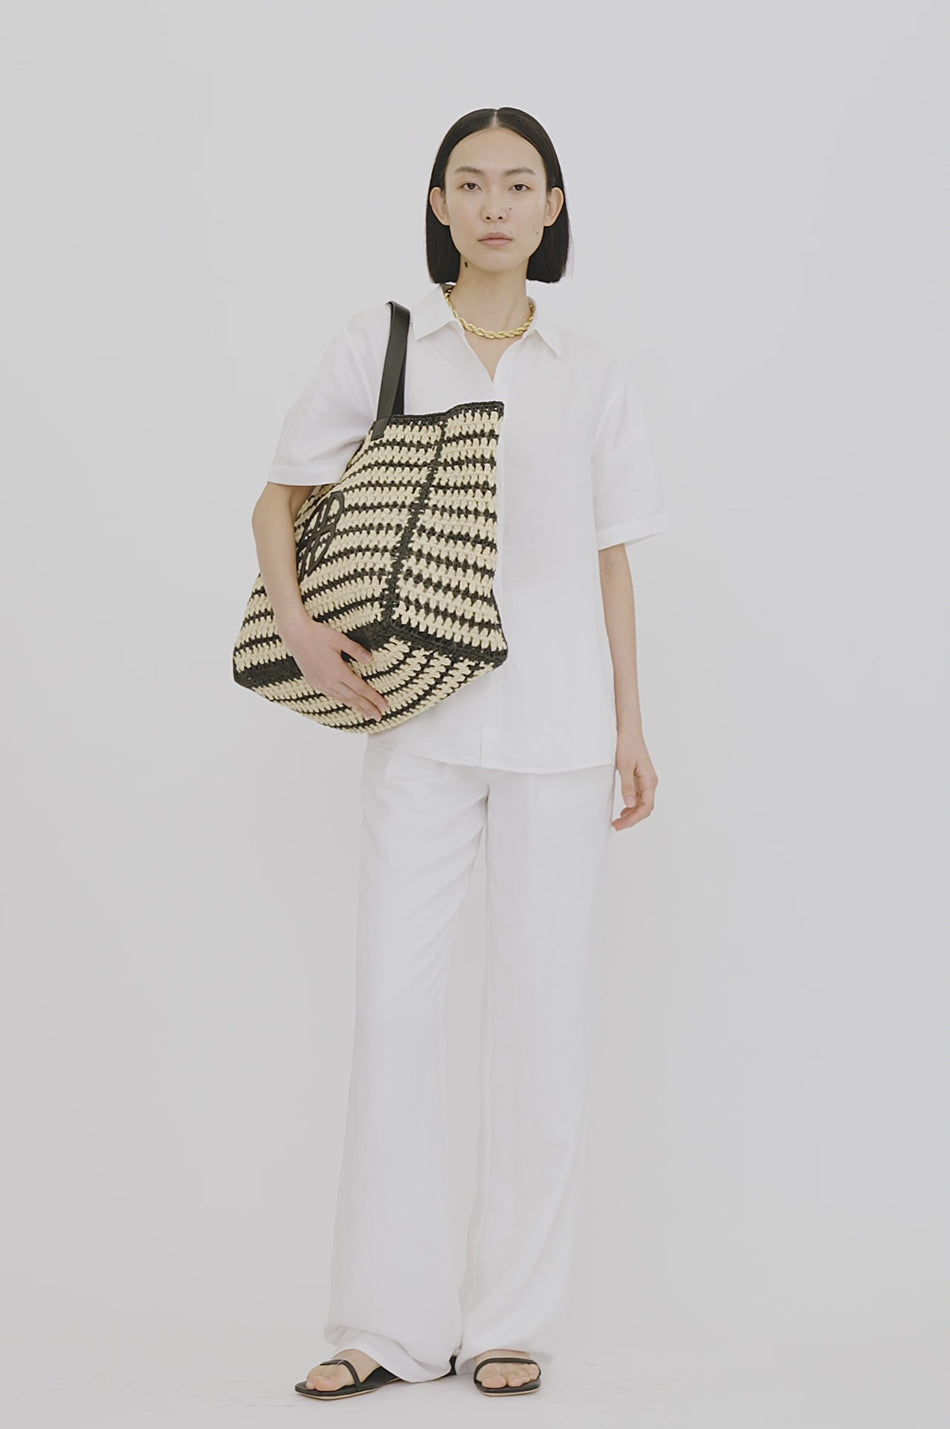 Clare V. Sandy Woven Market Tote in Natural